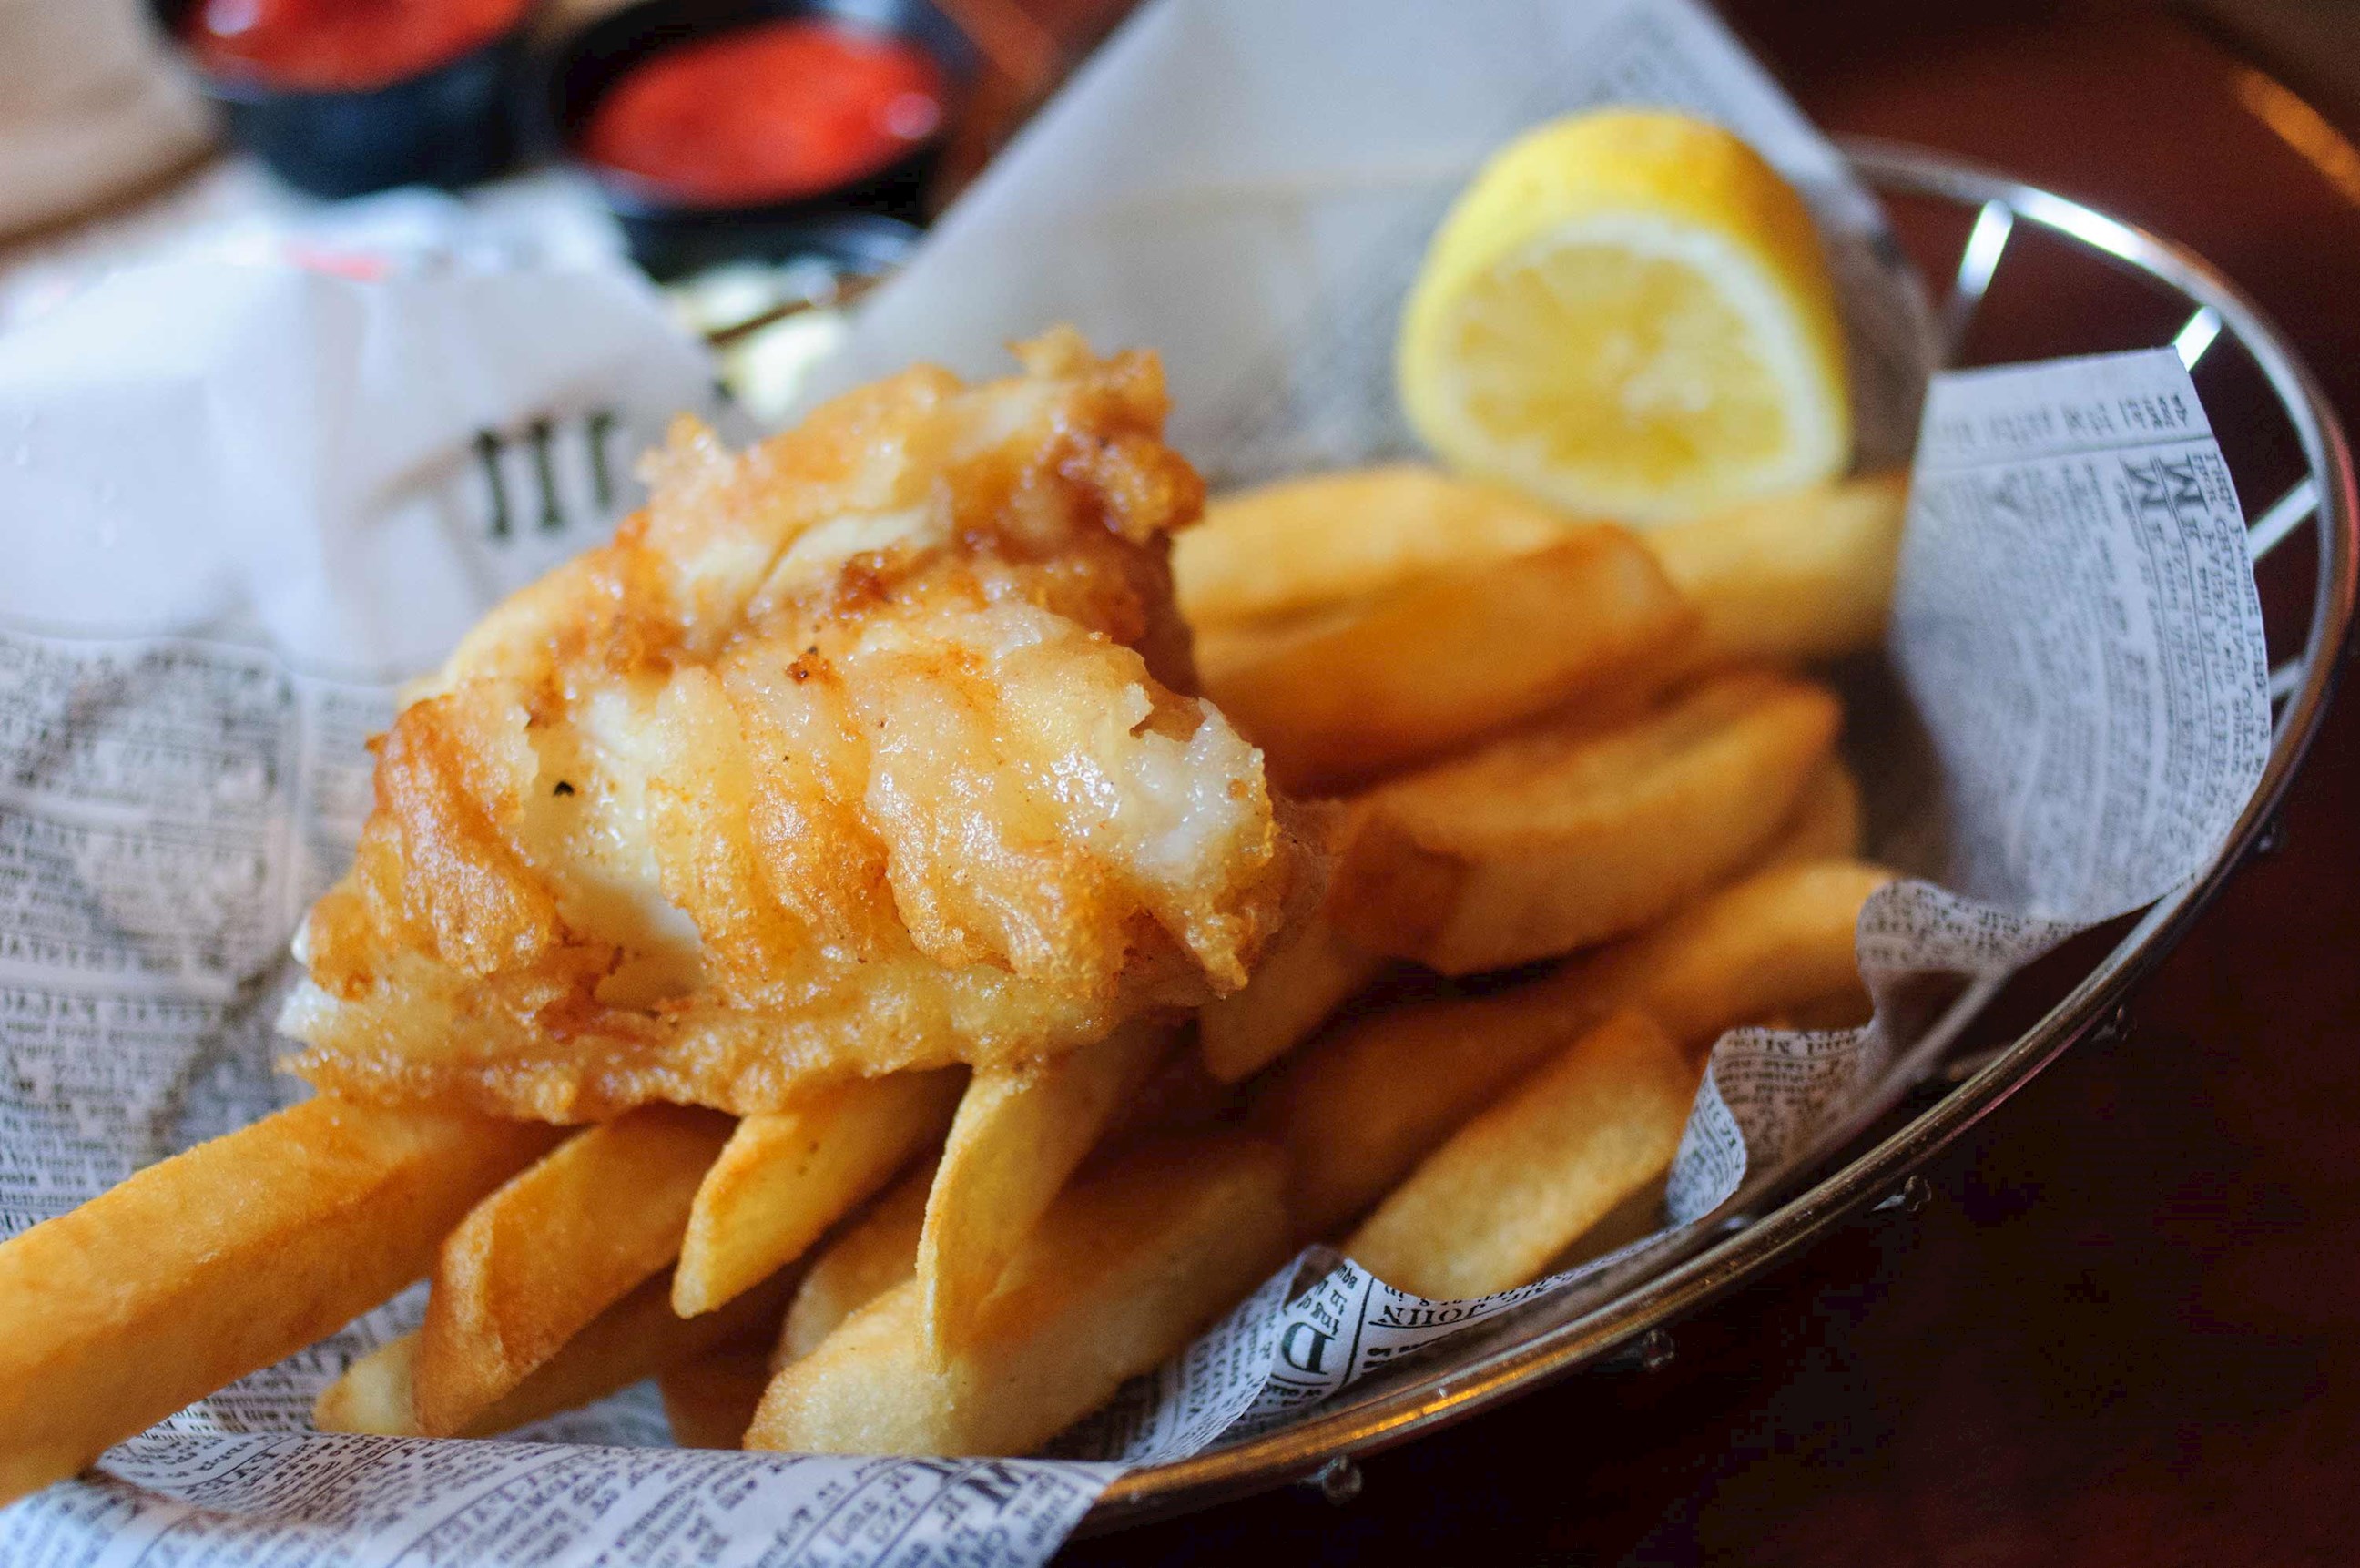 Walk with fish and chips in Belfast, Northern Ireland